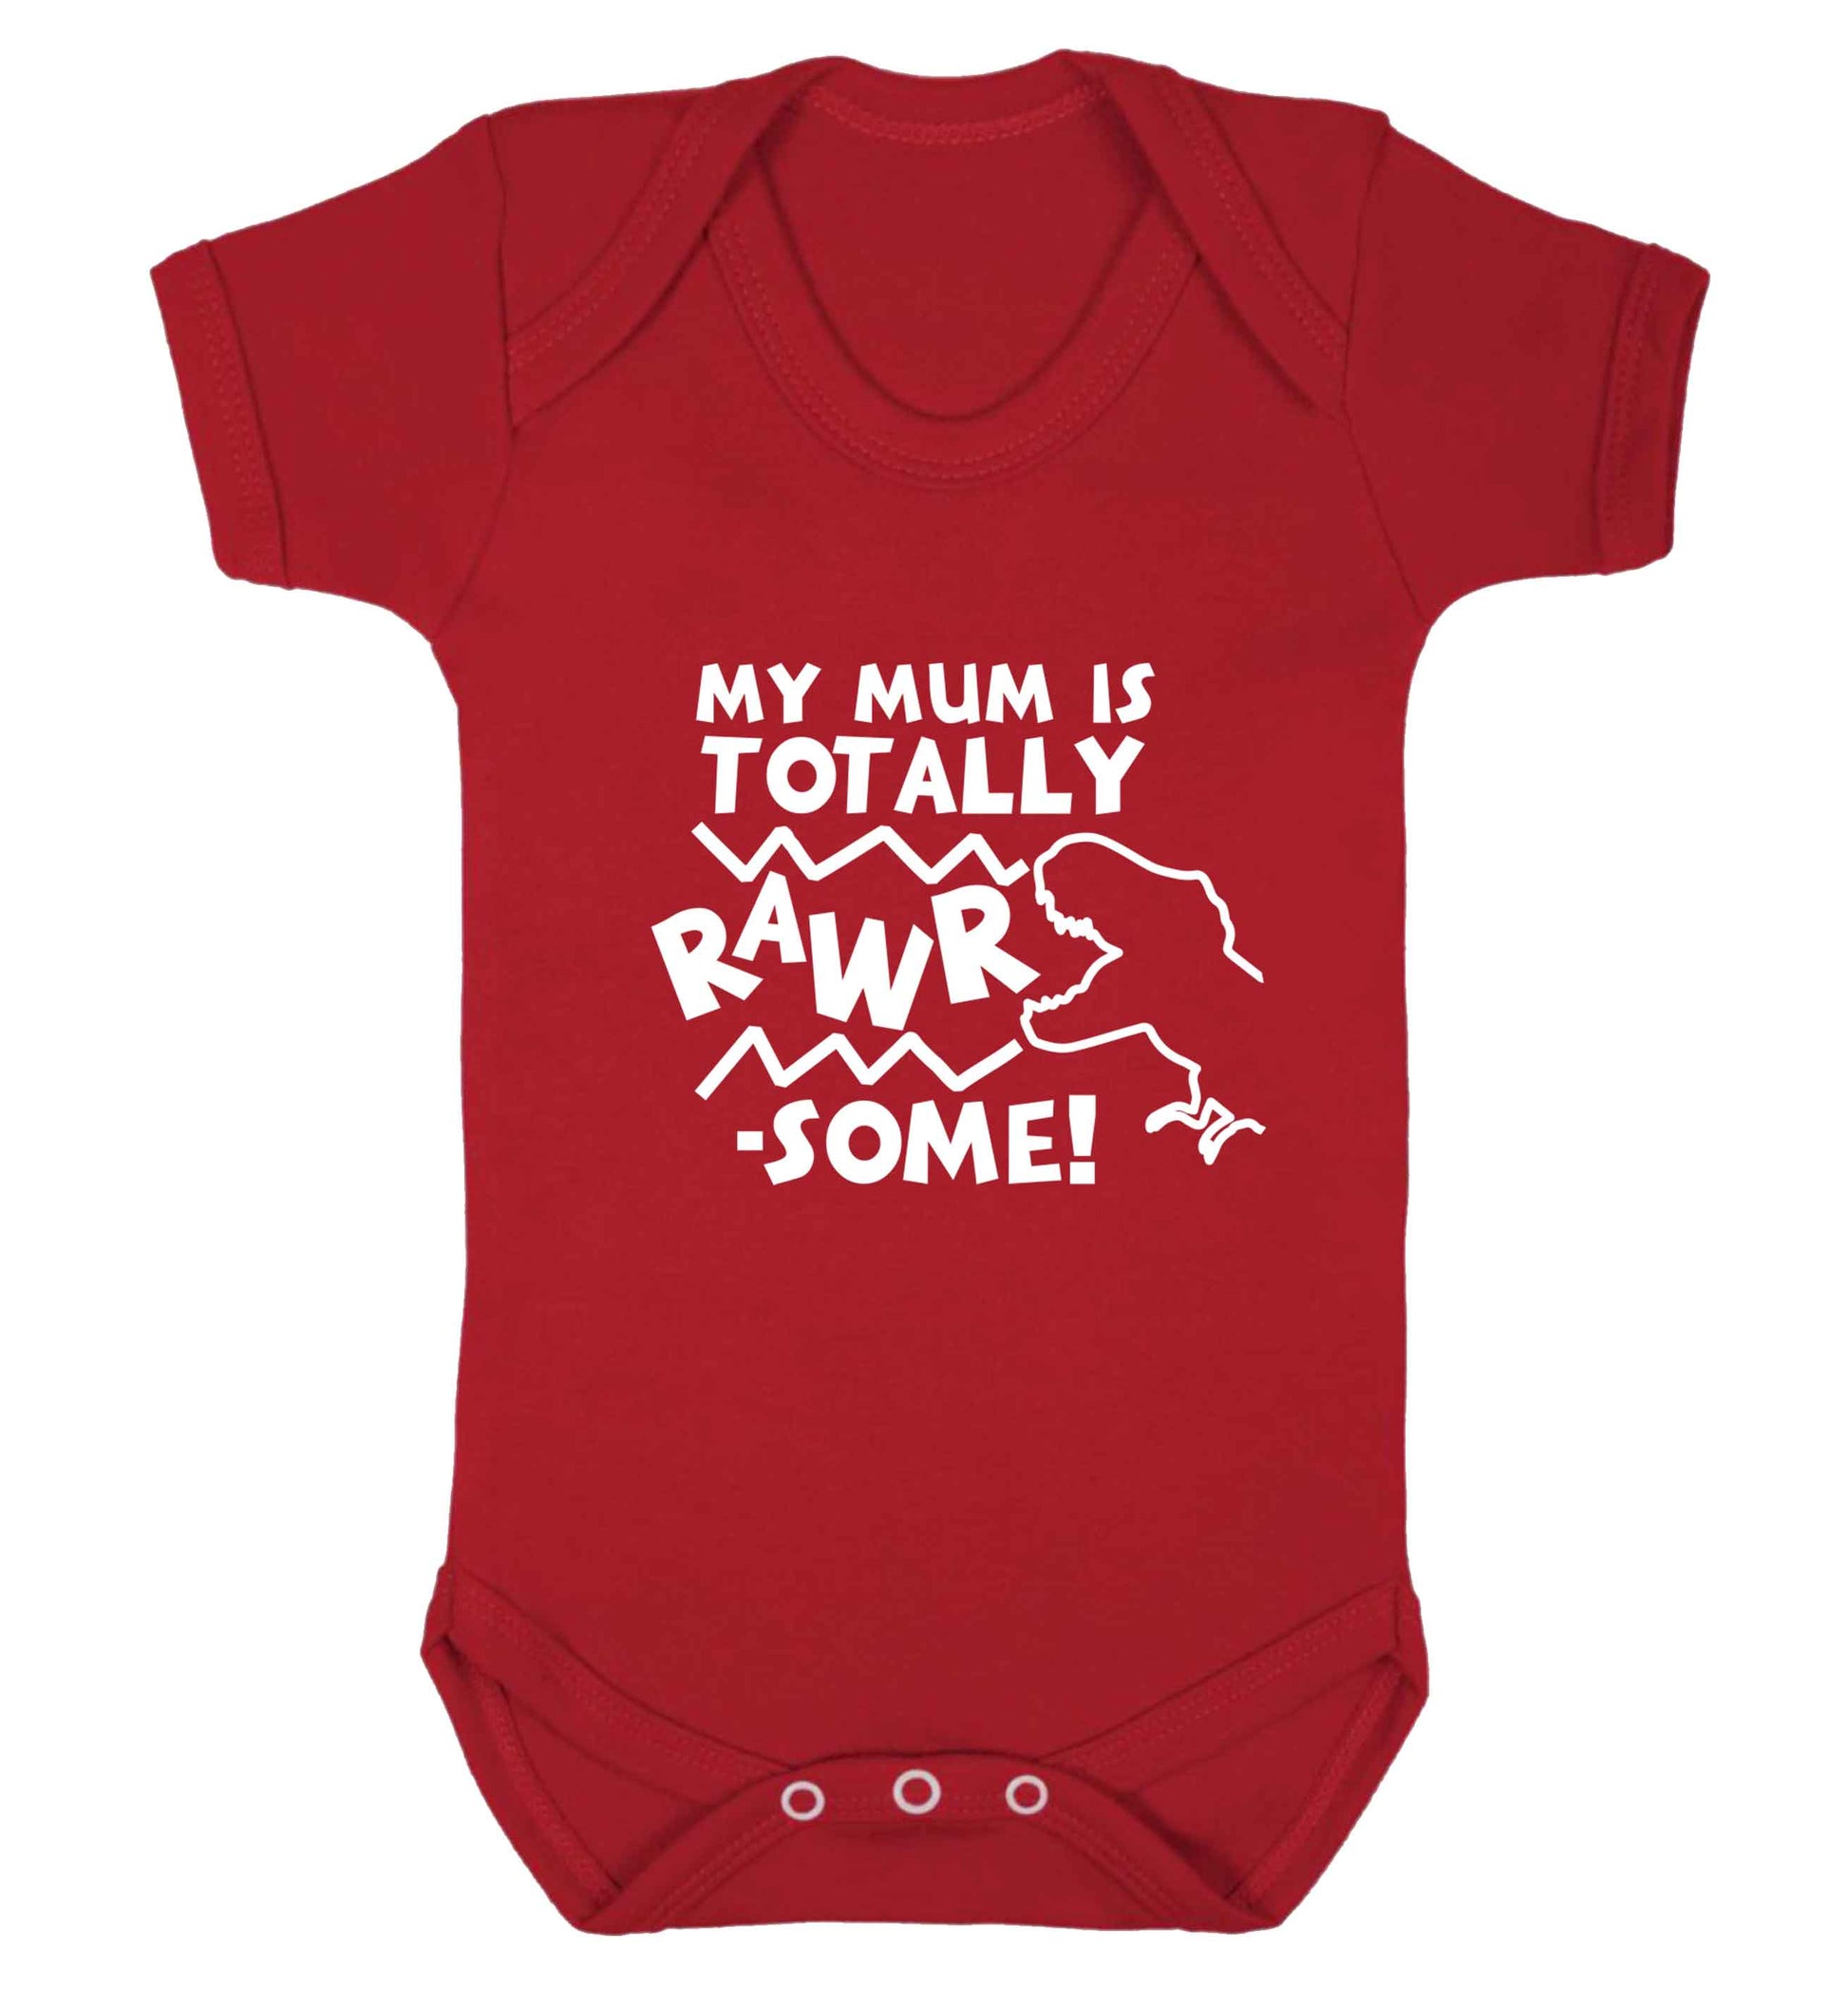 My mum is totally rawrsome baby vest red 18-24 months